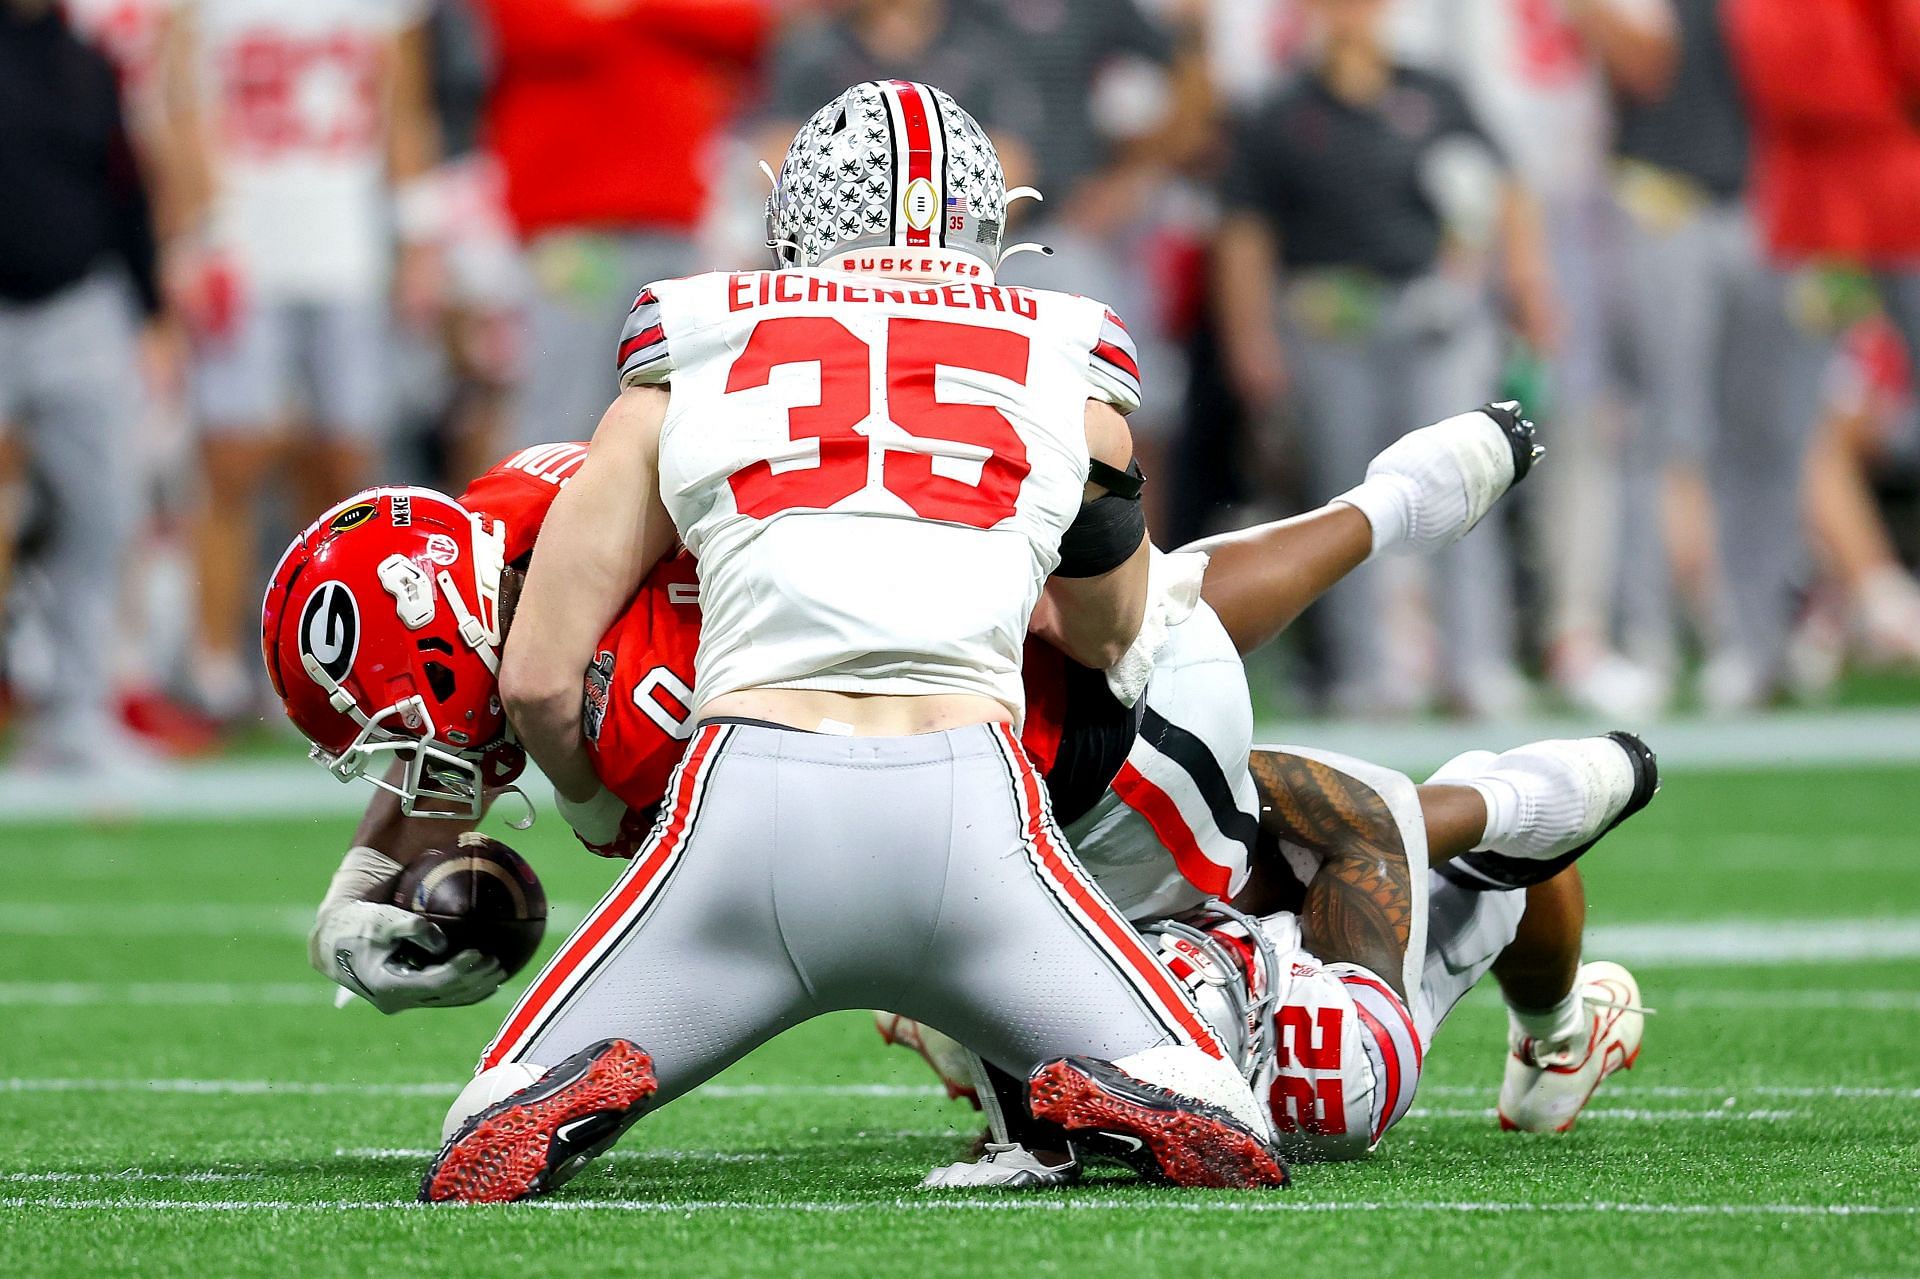 Darnell Washington #0 of the Georgia Bulldogs is tackled by Tommy Eichenberg #35 and Steele Chambers #22 of the Ohio State Buckeyes